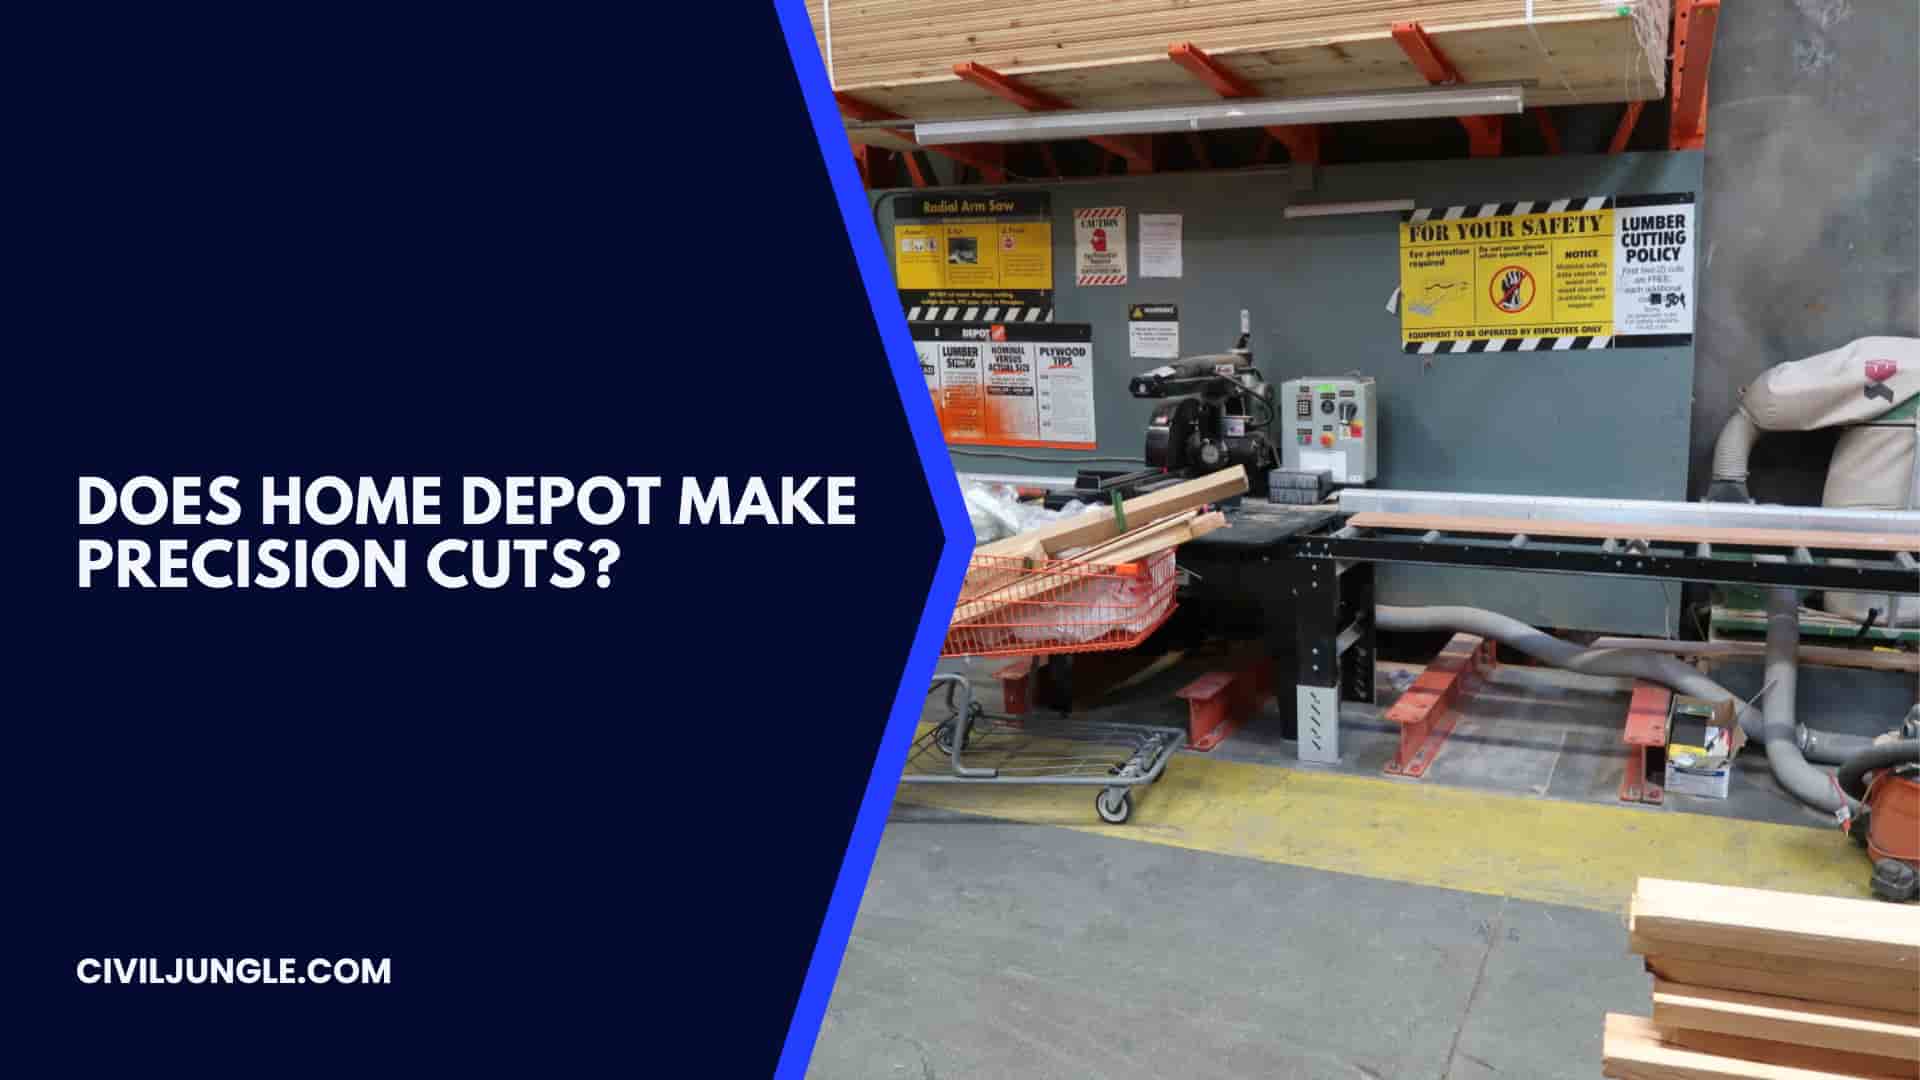 Does Home Depot Make Precision Cuts?